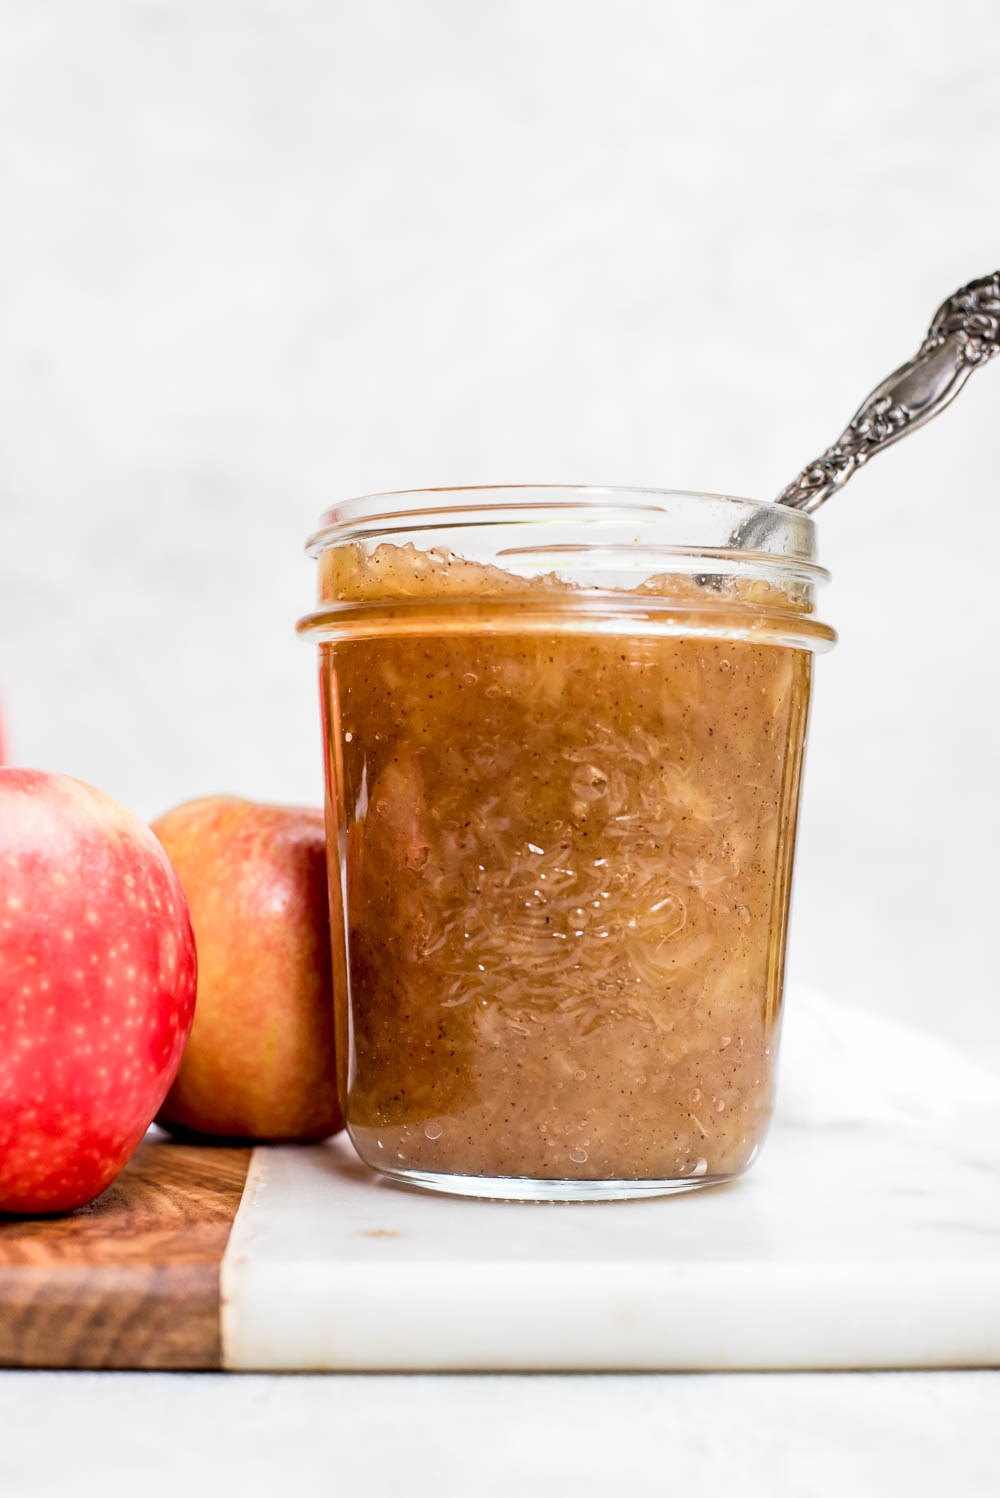 homemade applesauce in jar with spoon by whole apples